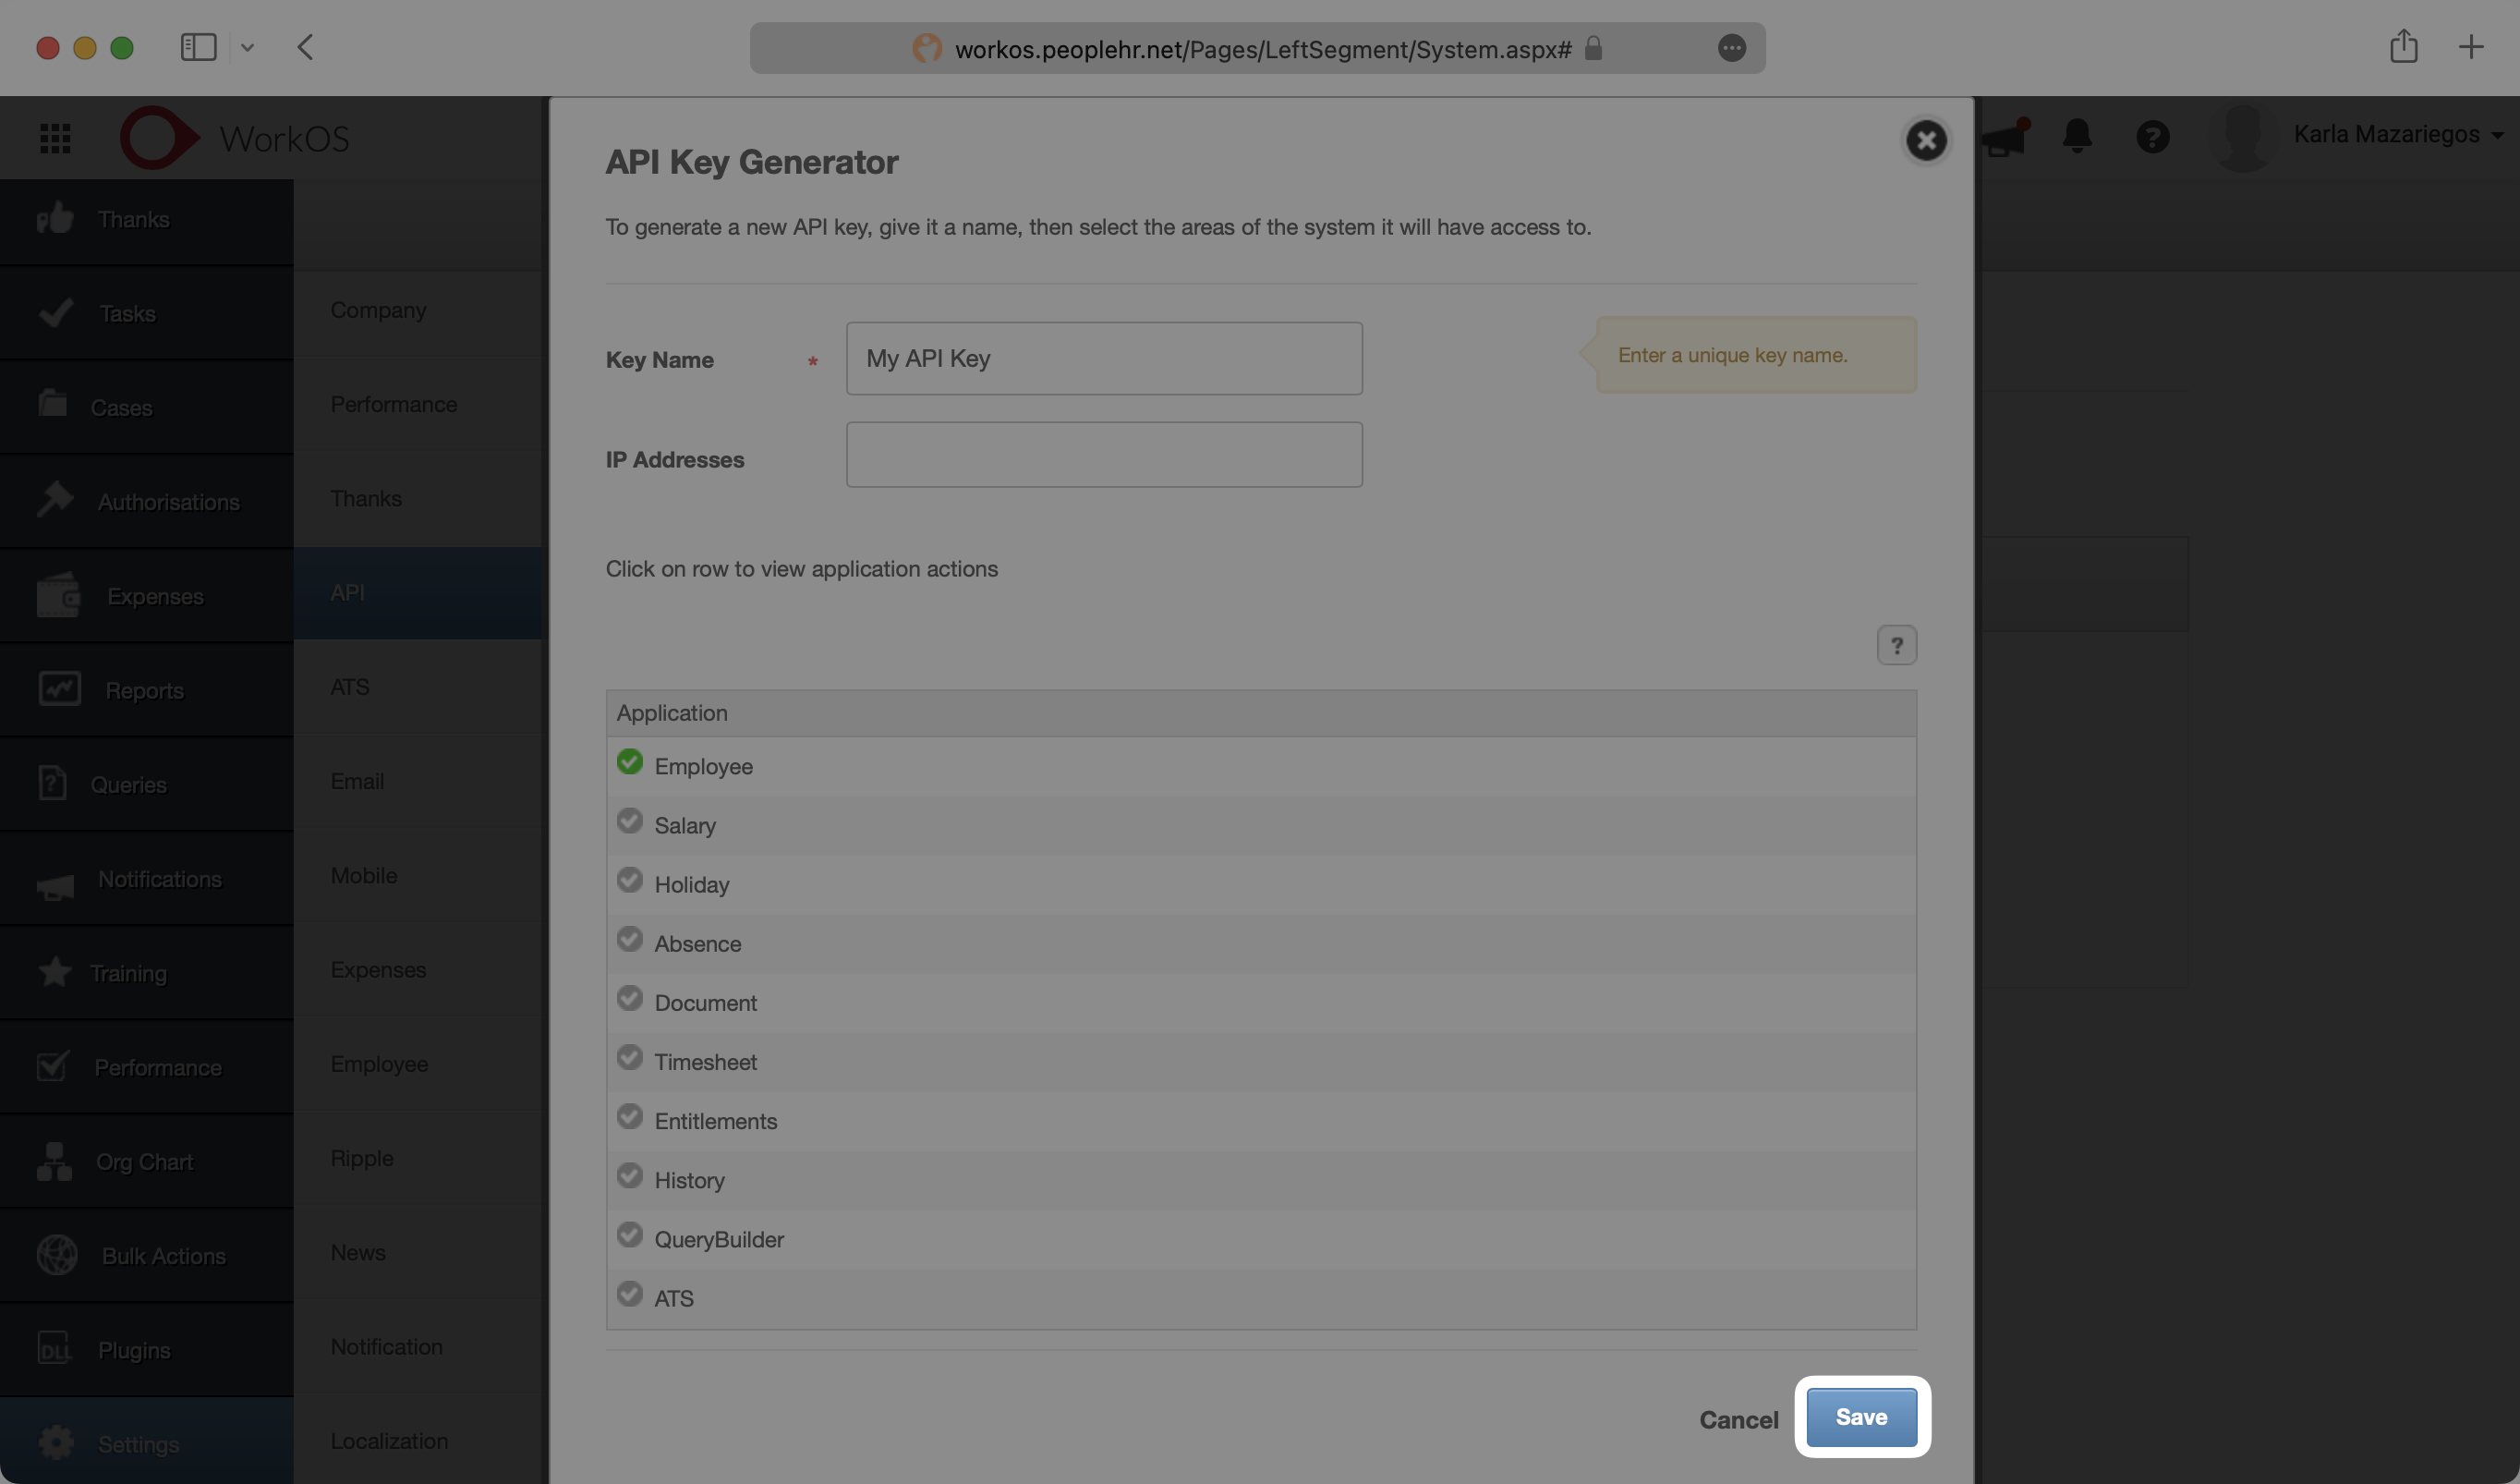 A screenshot showing the API Key Generator page in the Access People HR Dashboard.